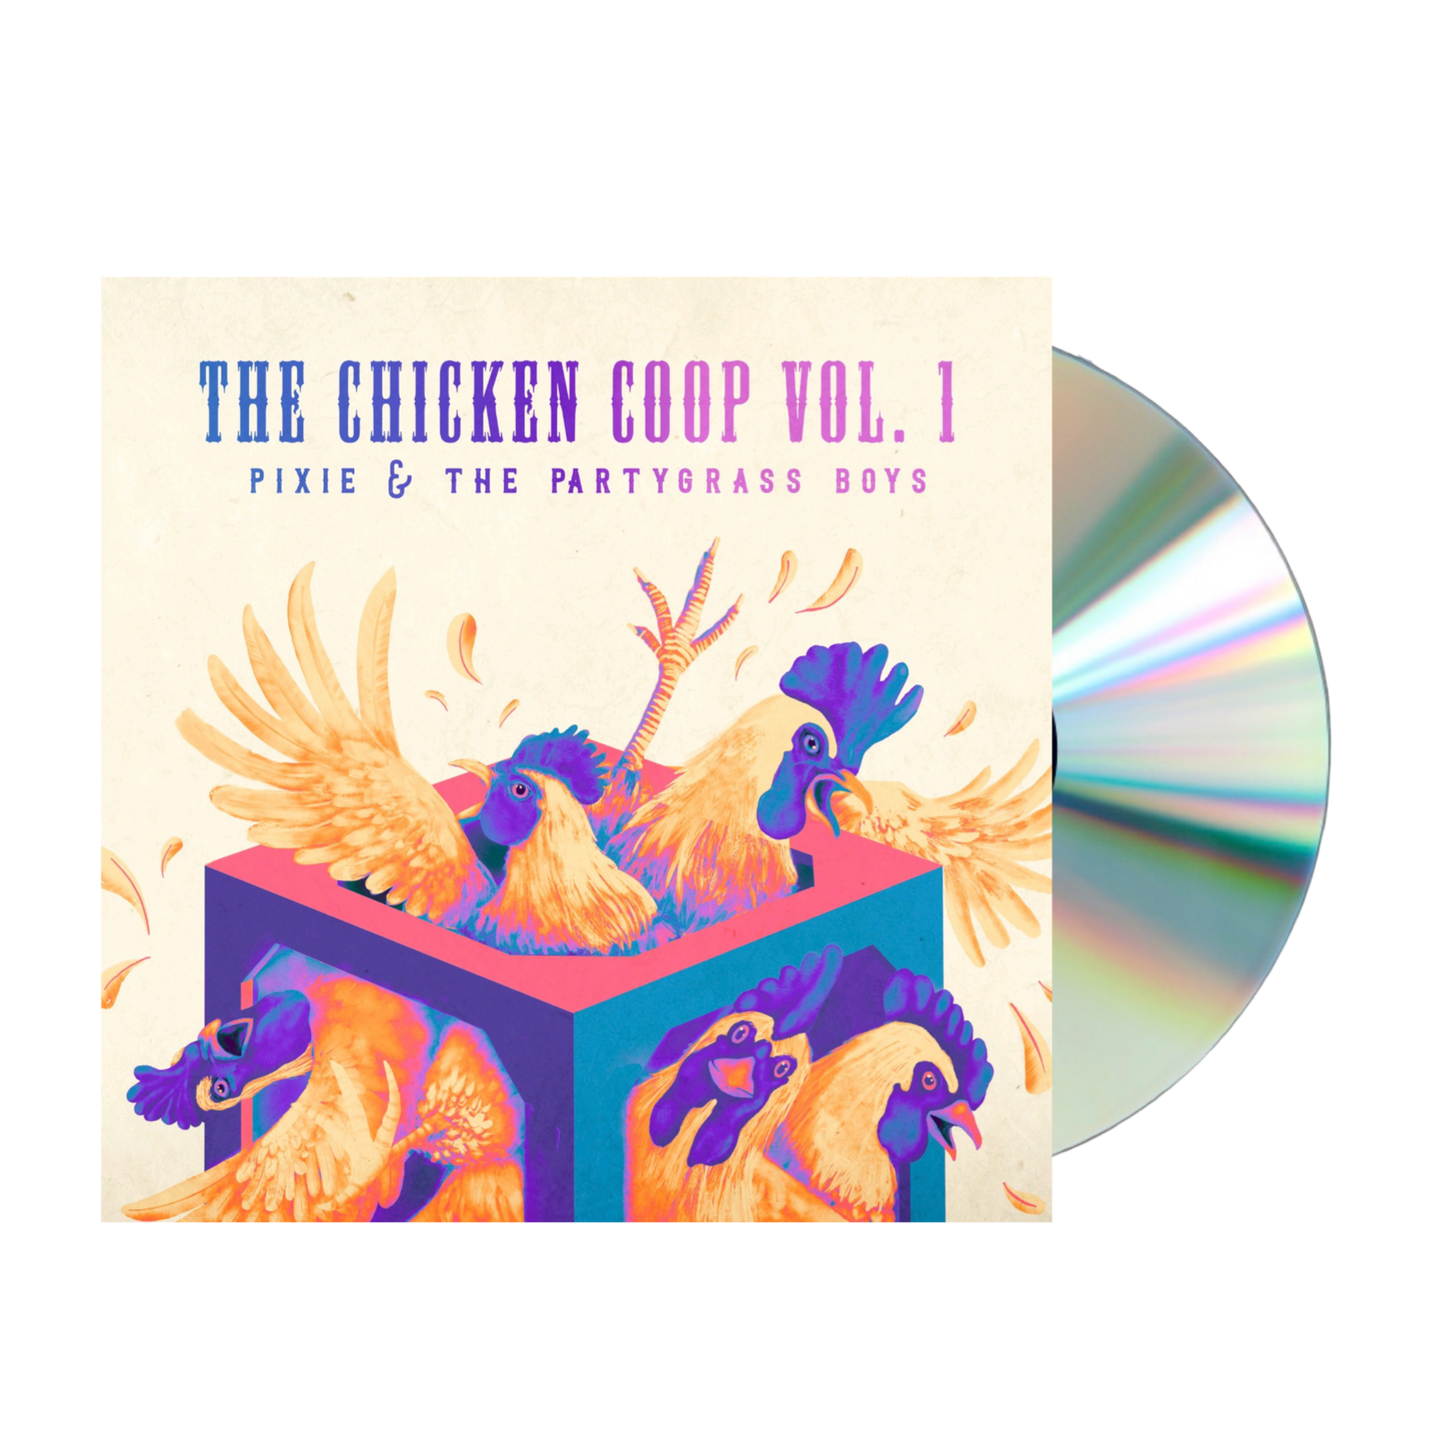 Pixie and The Partygrass Boys - The Chicken Coop, Vol. 1 CD